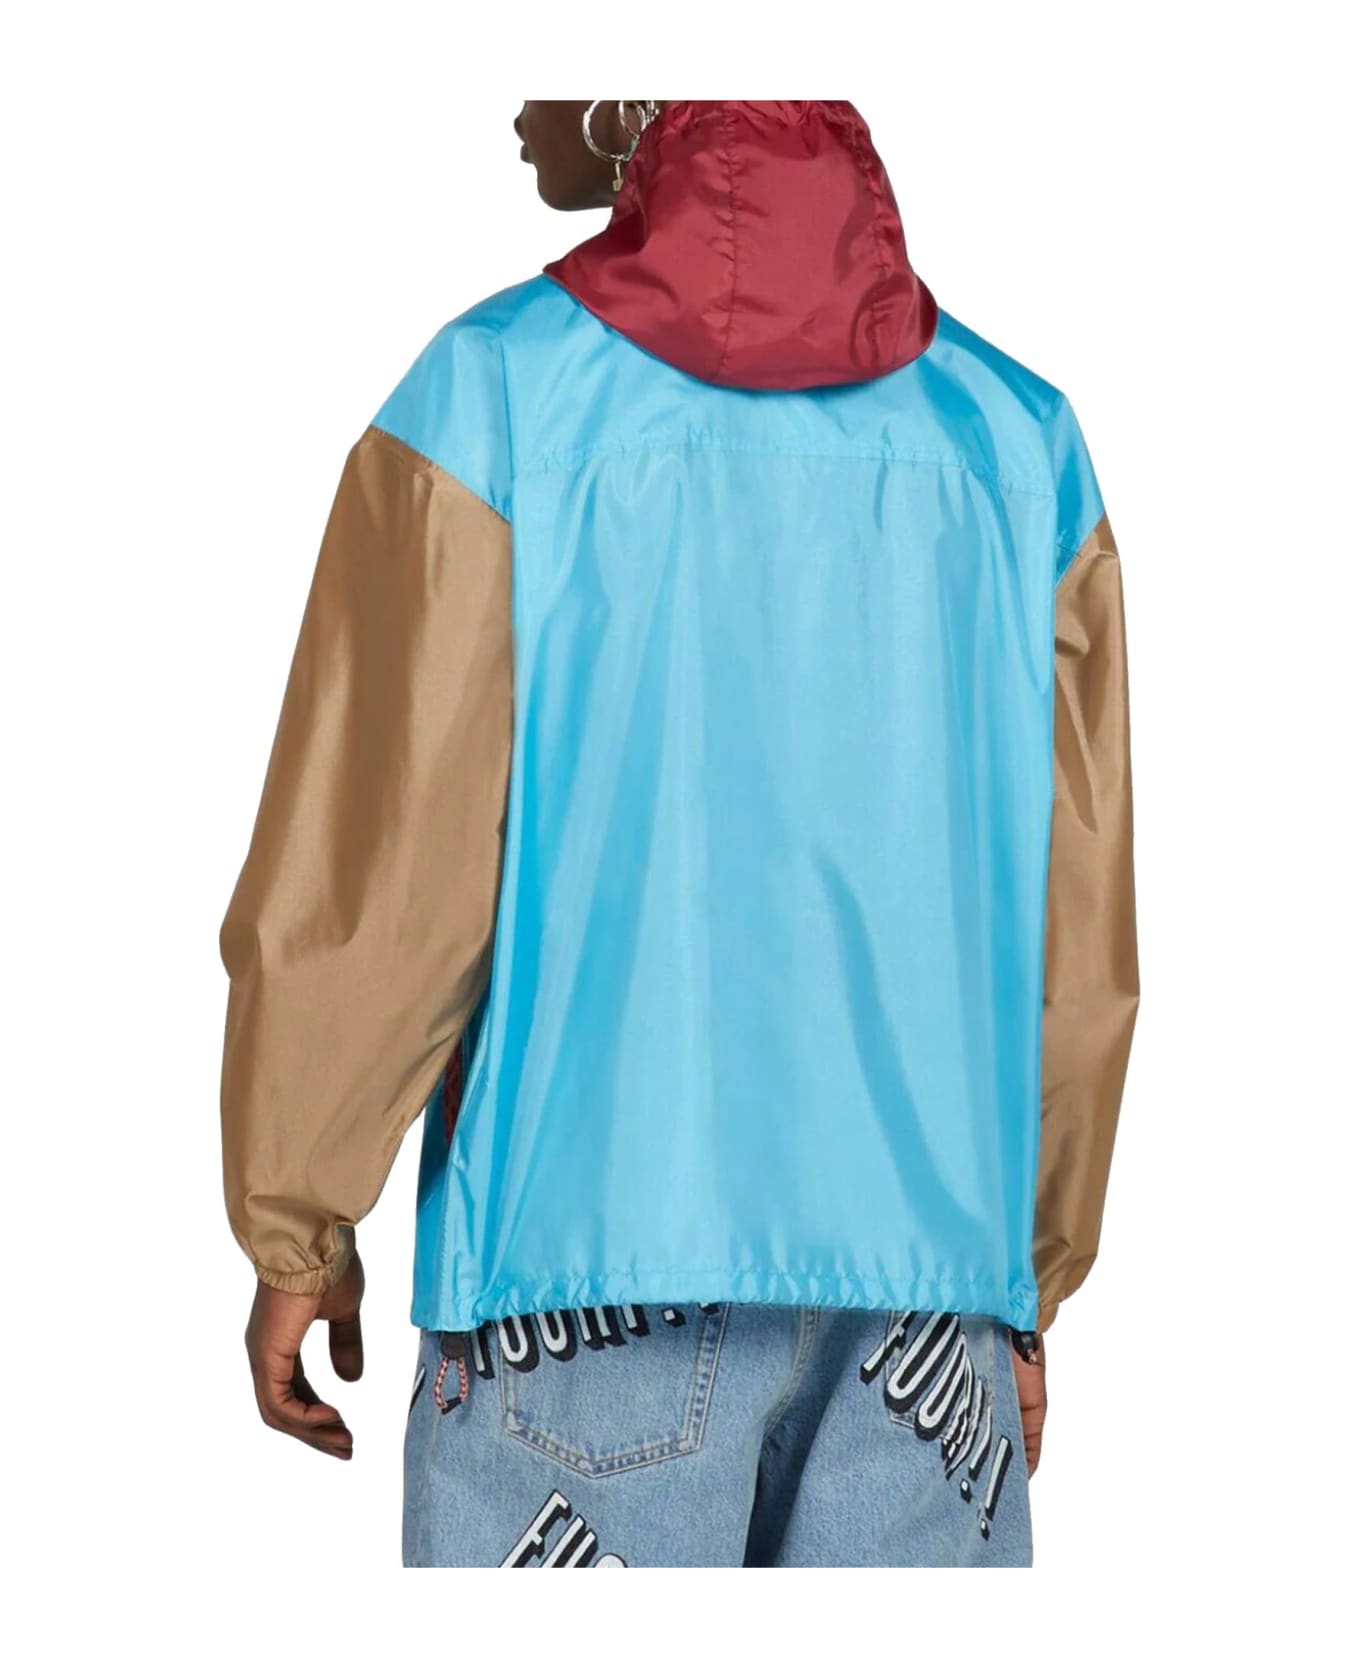 Gucci Hooded Lightweight Jacket - Multicolor